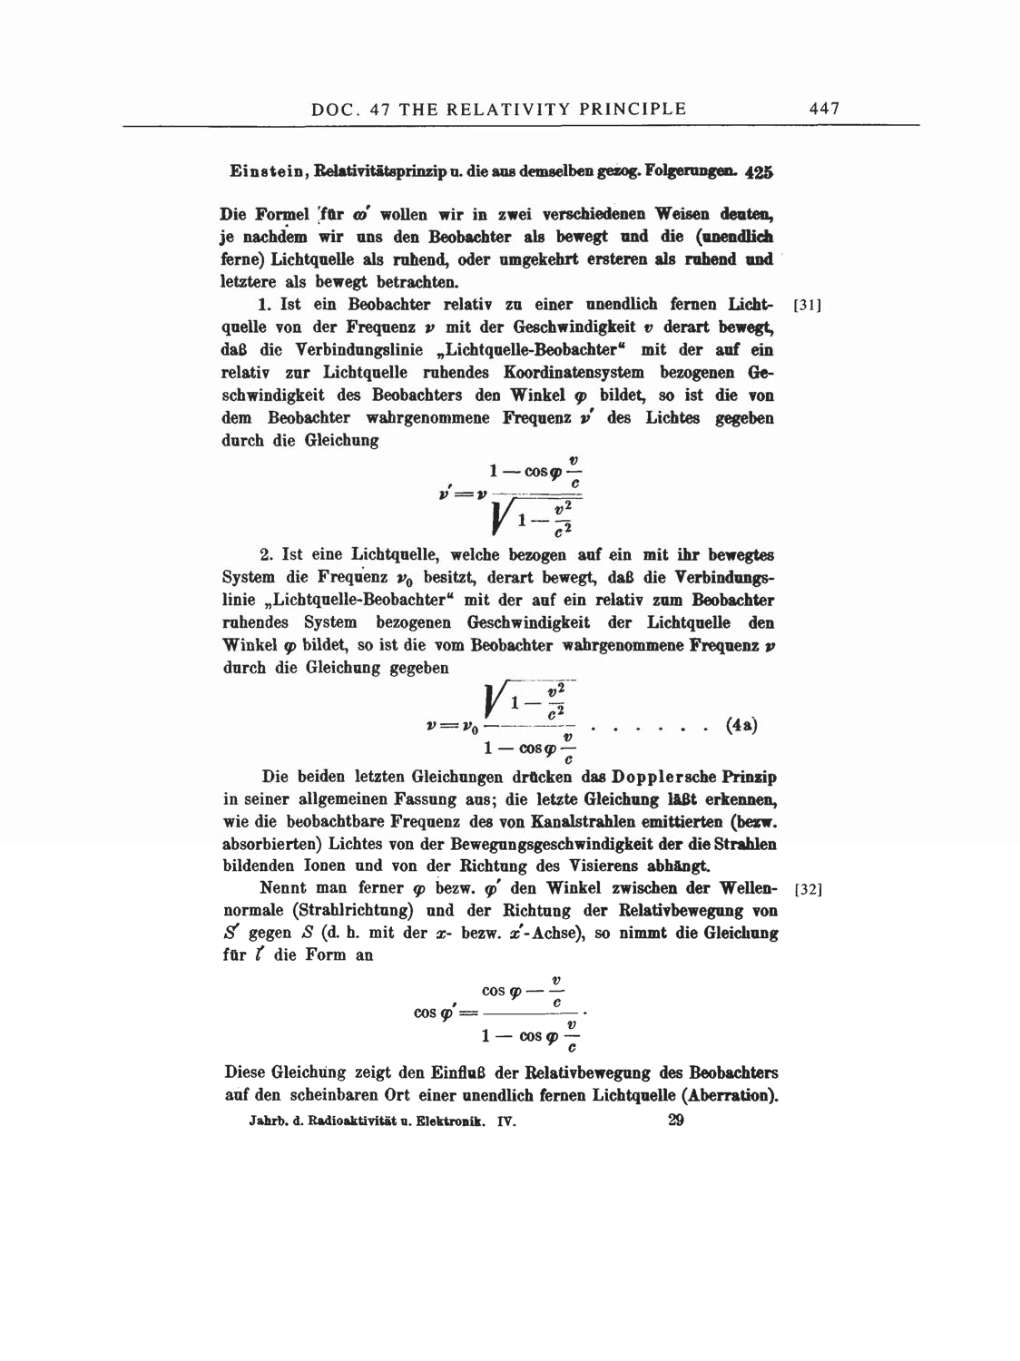 Volume 2: The Swiss Years: Writings, 1900-1909 page 447